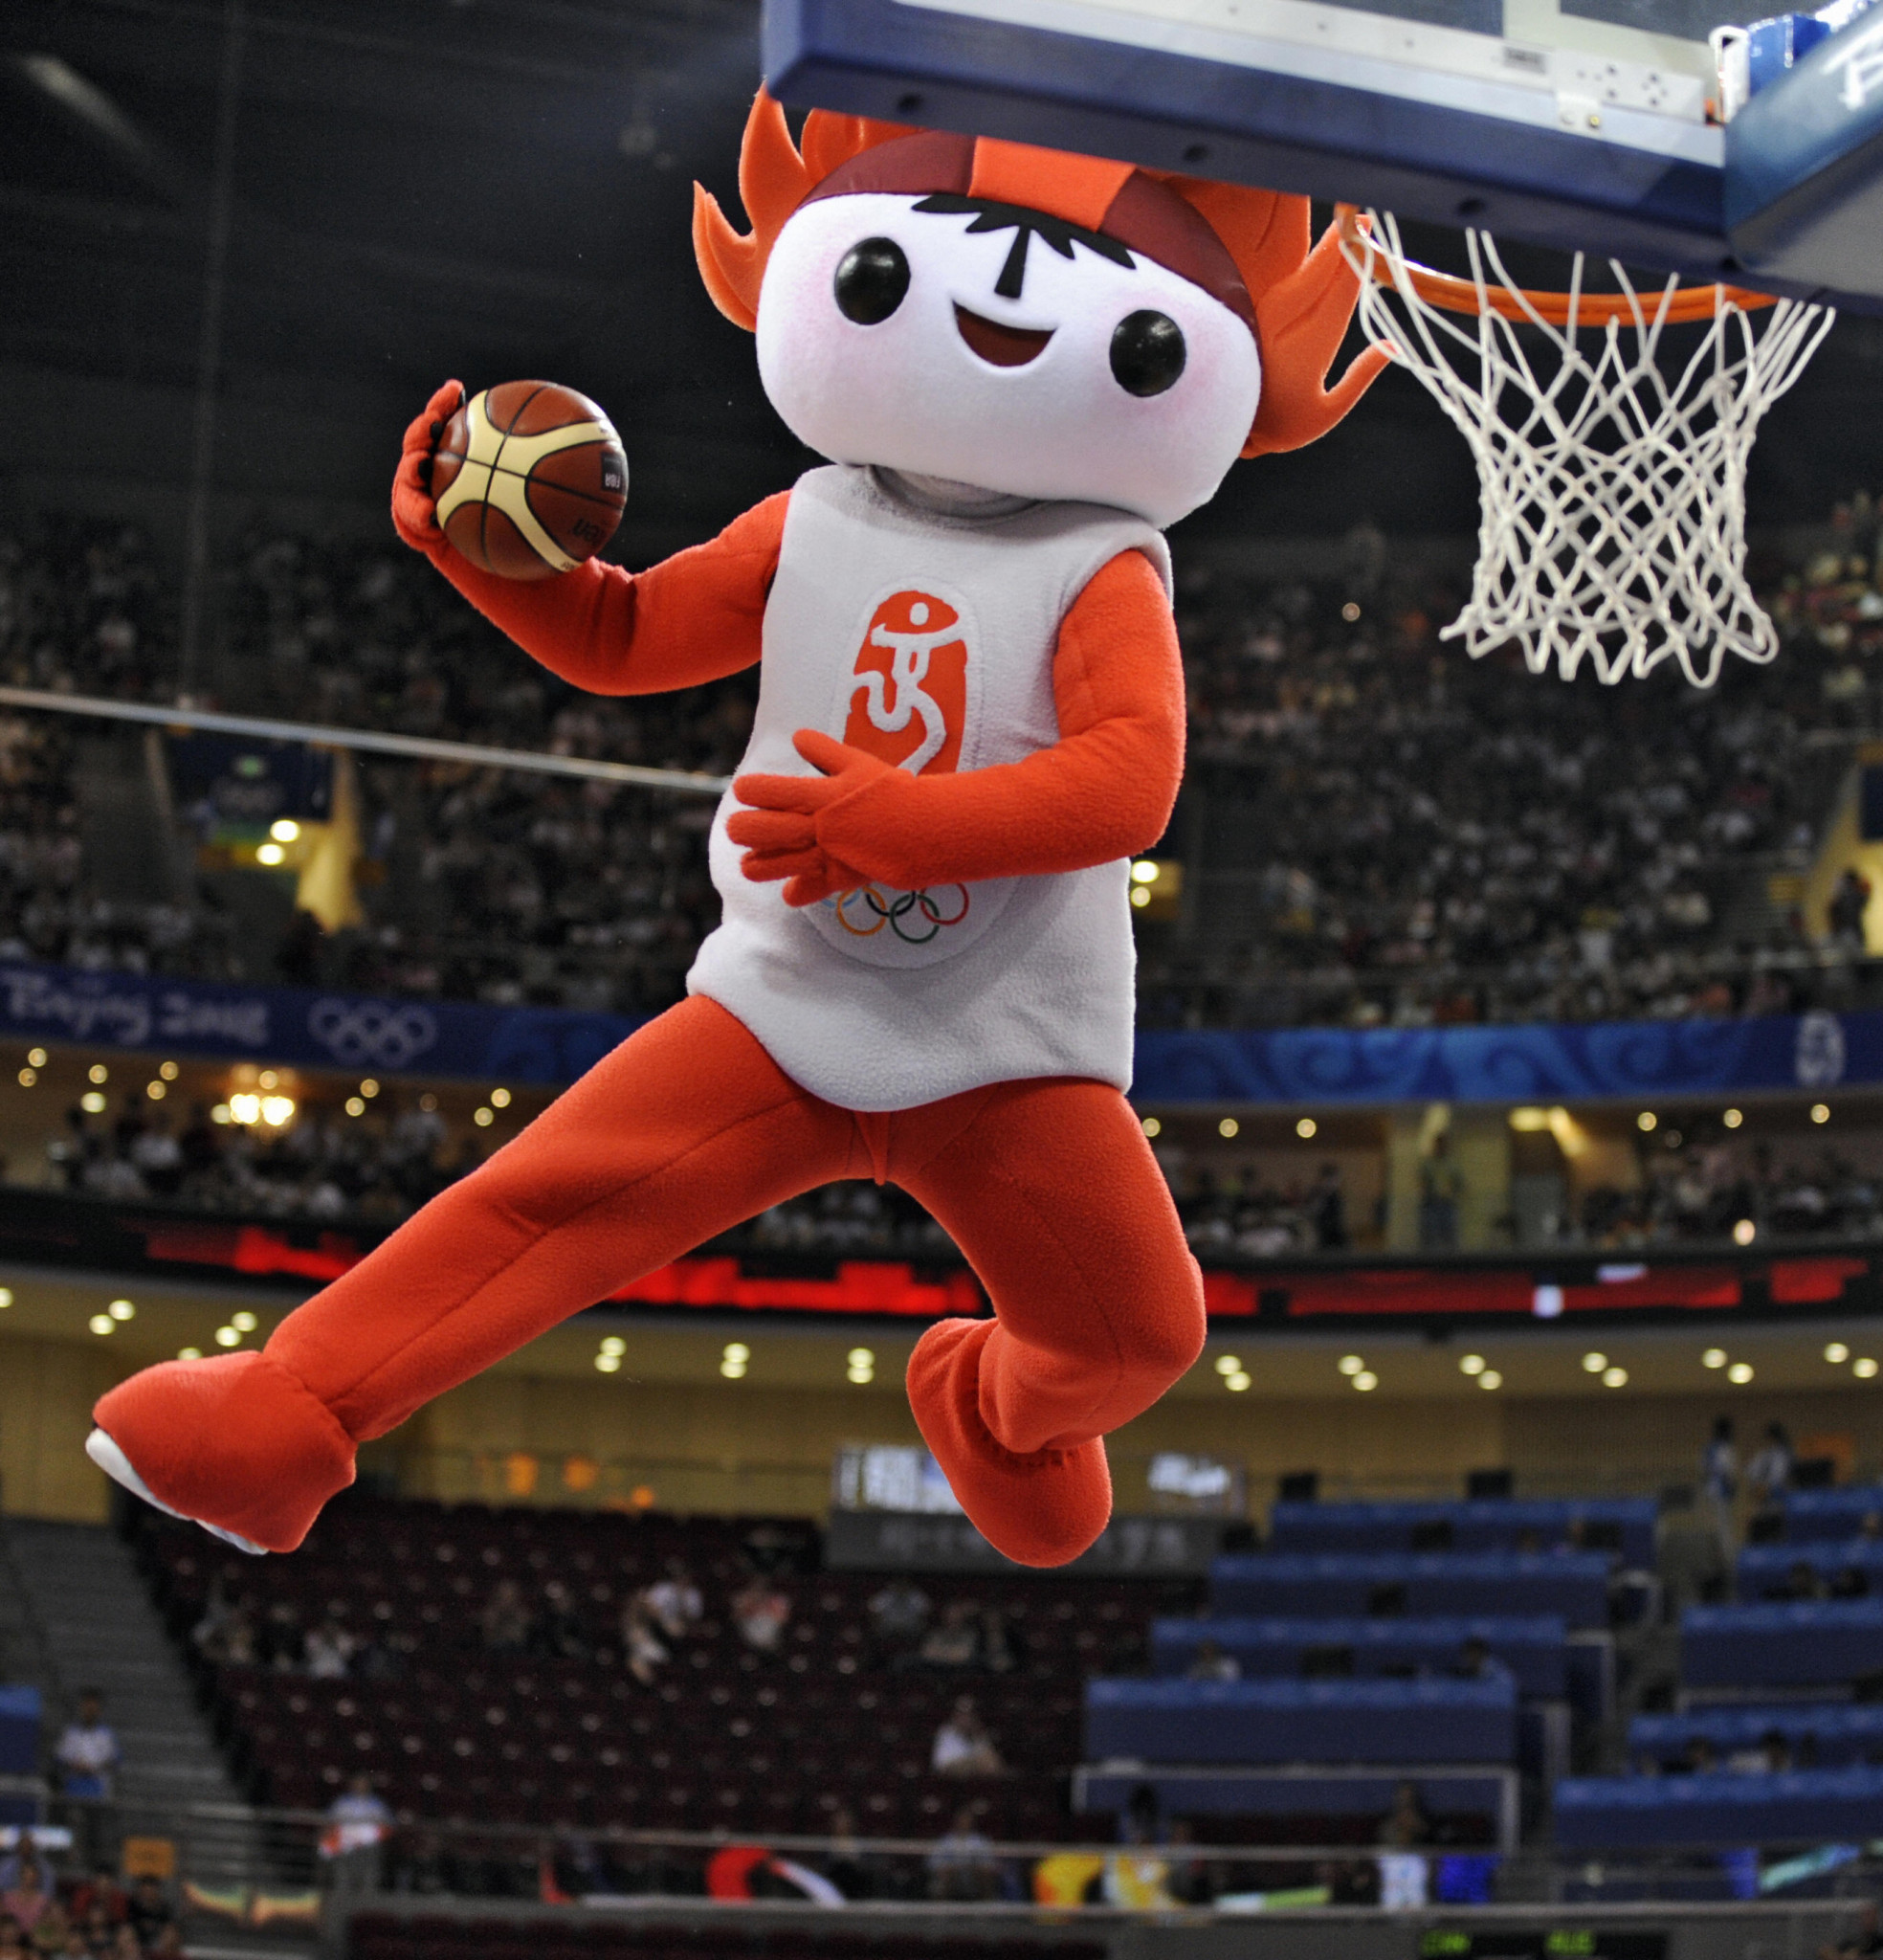 One of the Beijing 2008 mascots tries its hand at basketball ©Getty Images